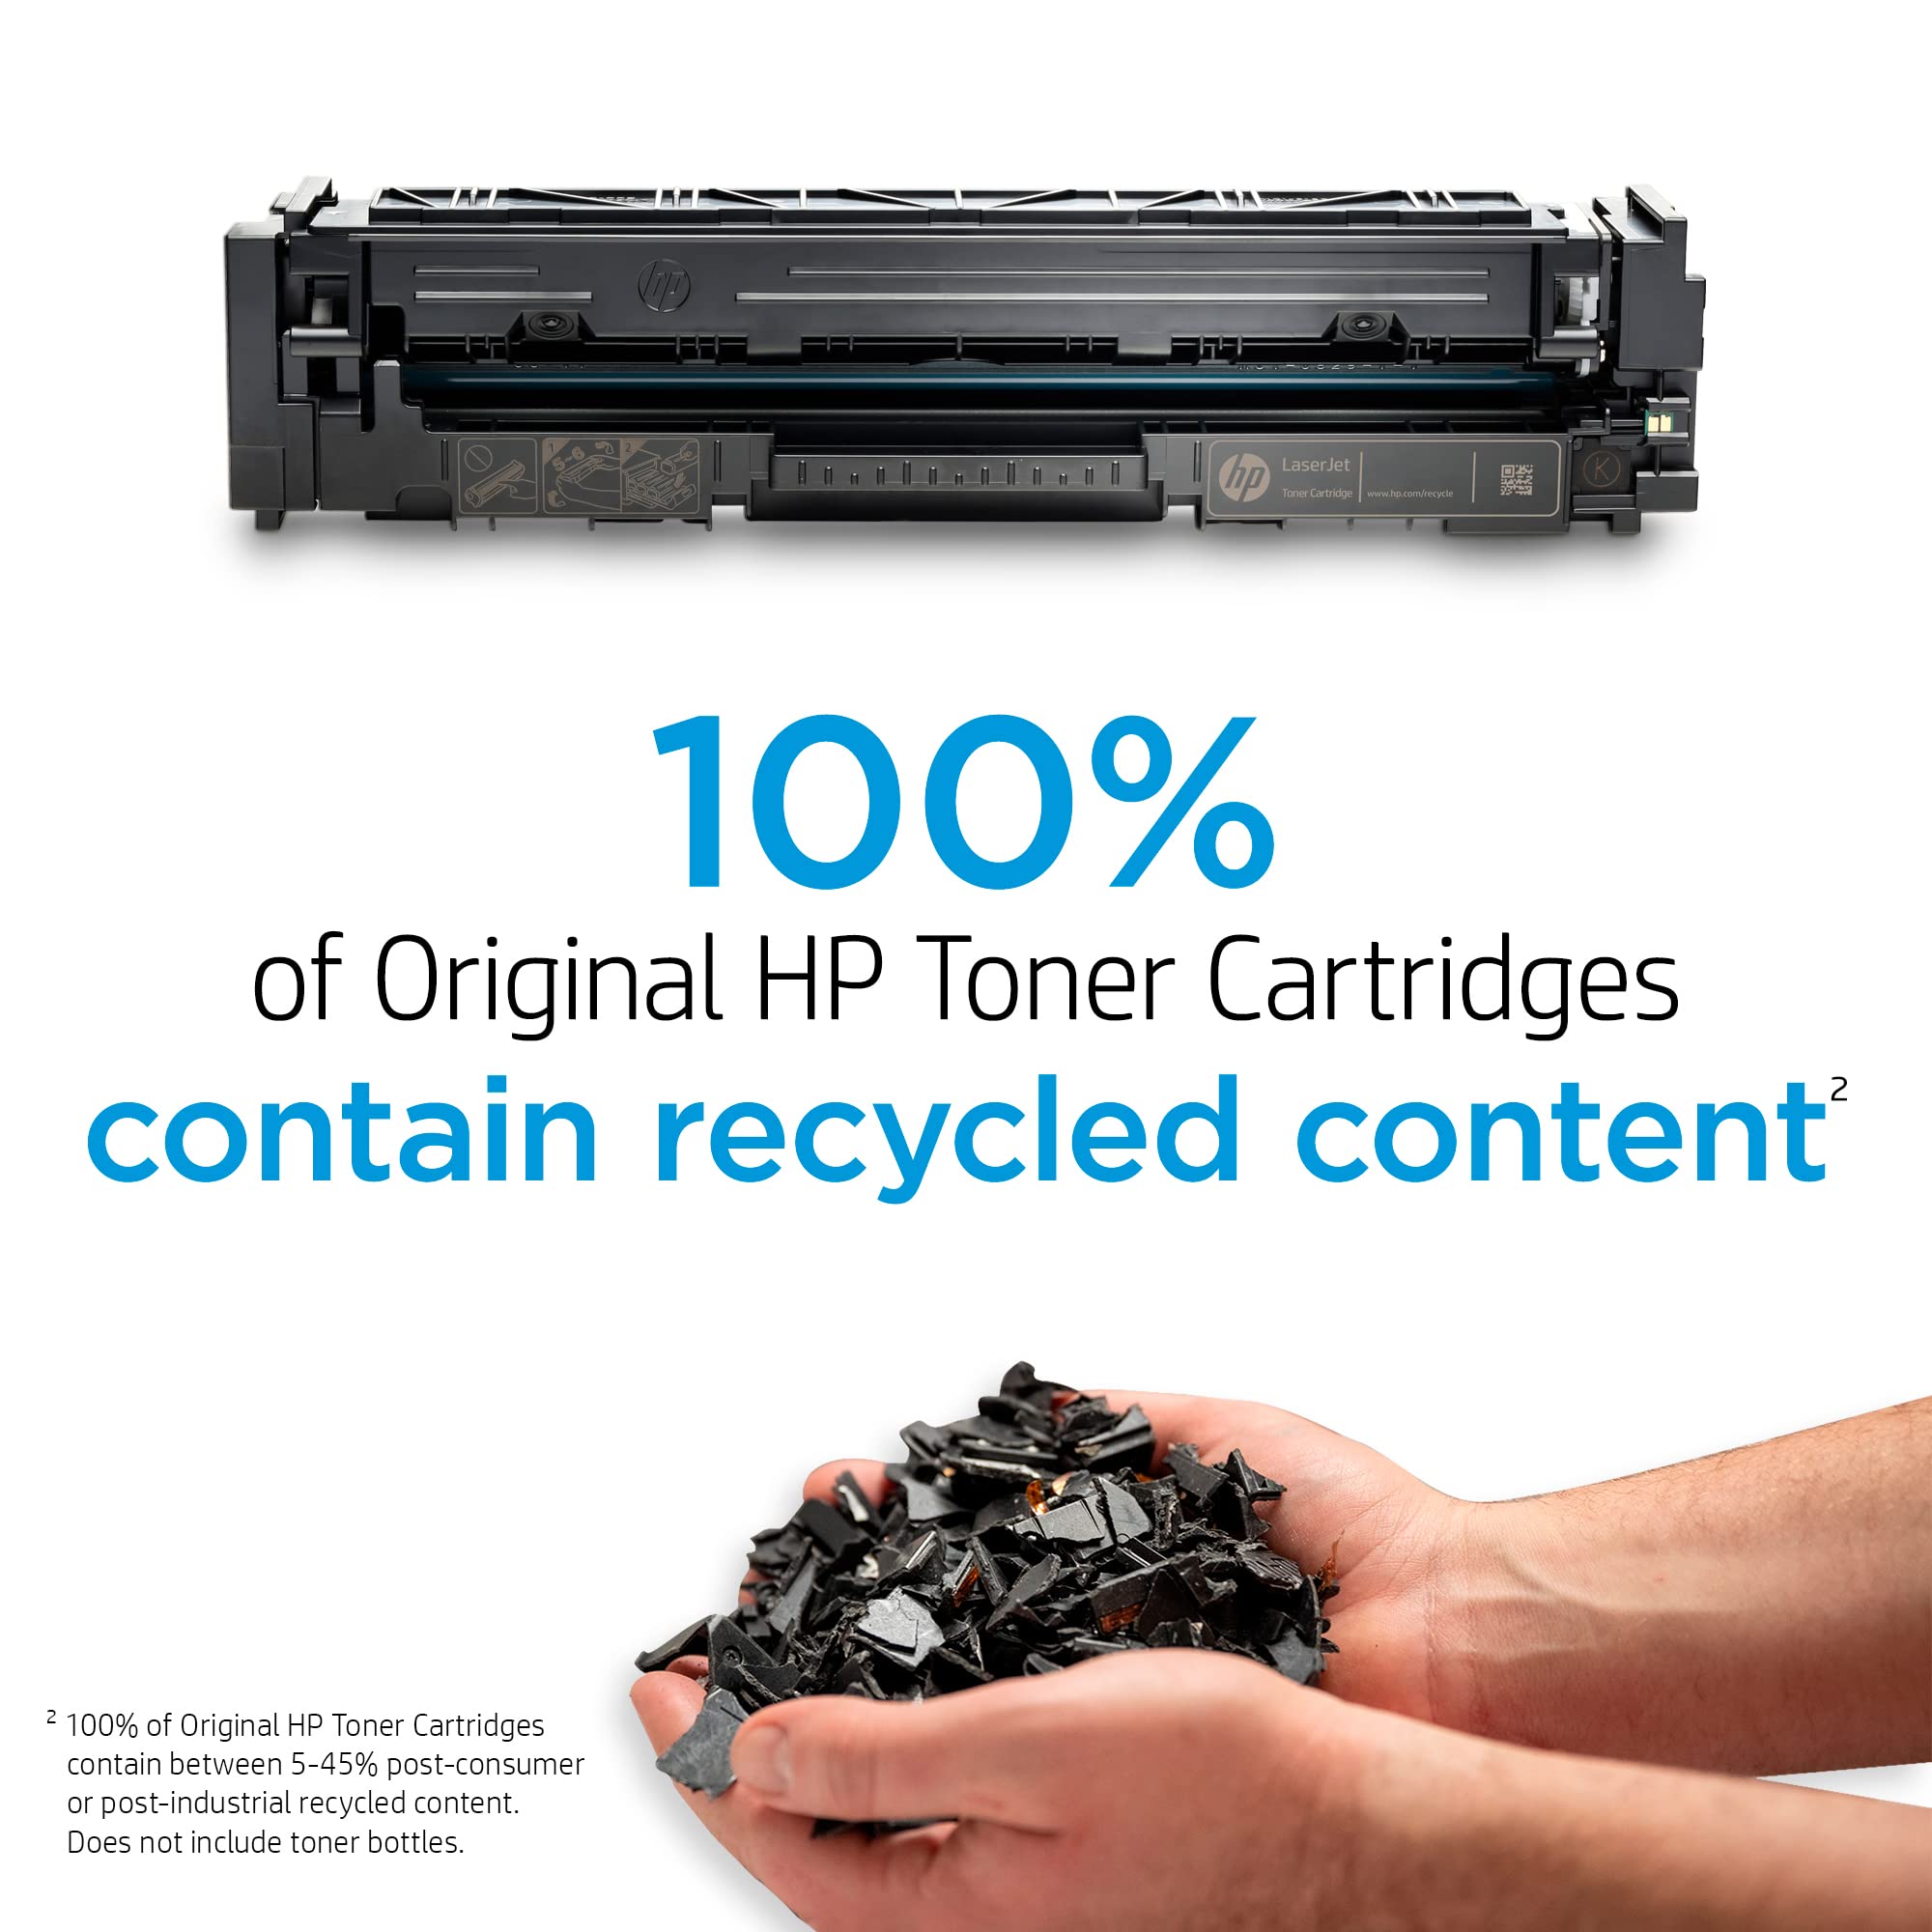 HP 202A Black Toner Cartridge | Works with HP Color LaserJet Pro M254, HP Color LaserJet Pro MFP M281 Series | CF500A